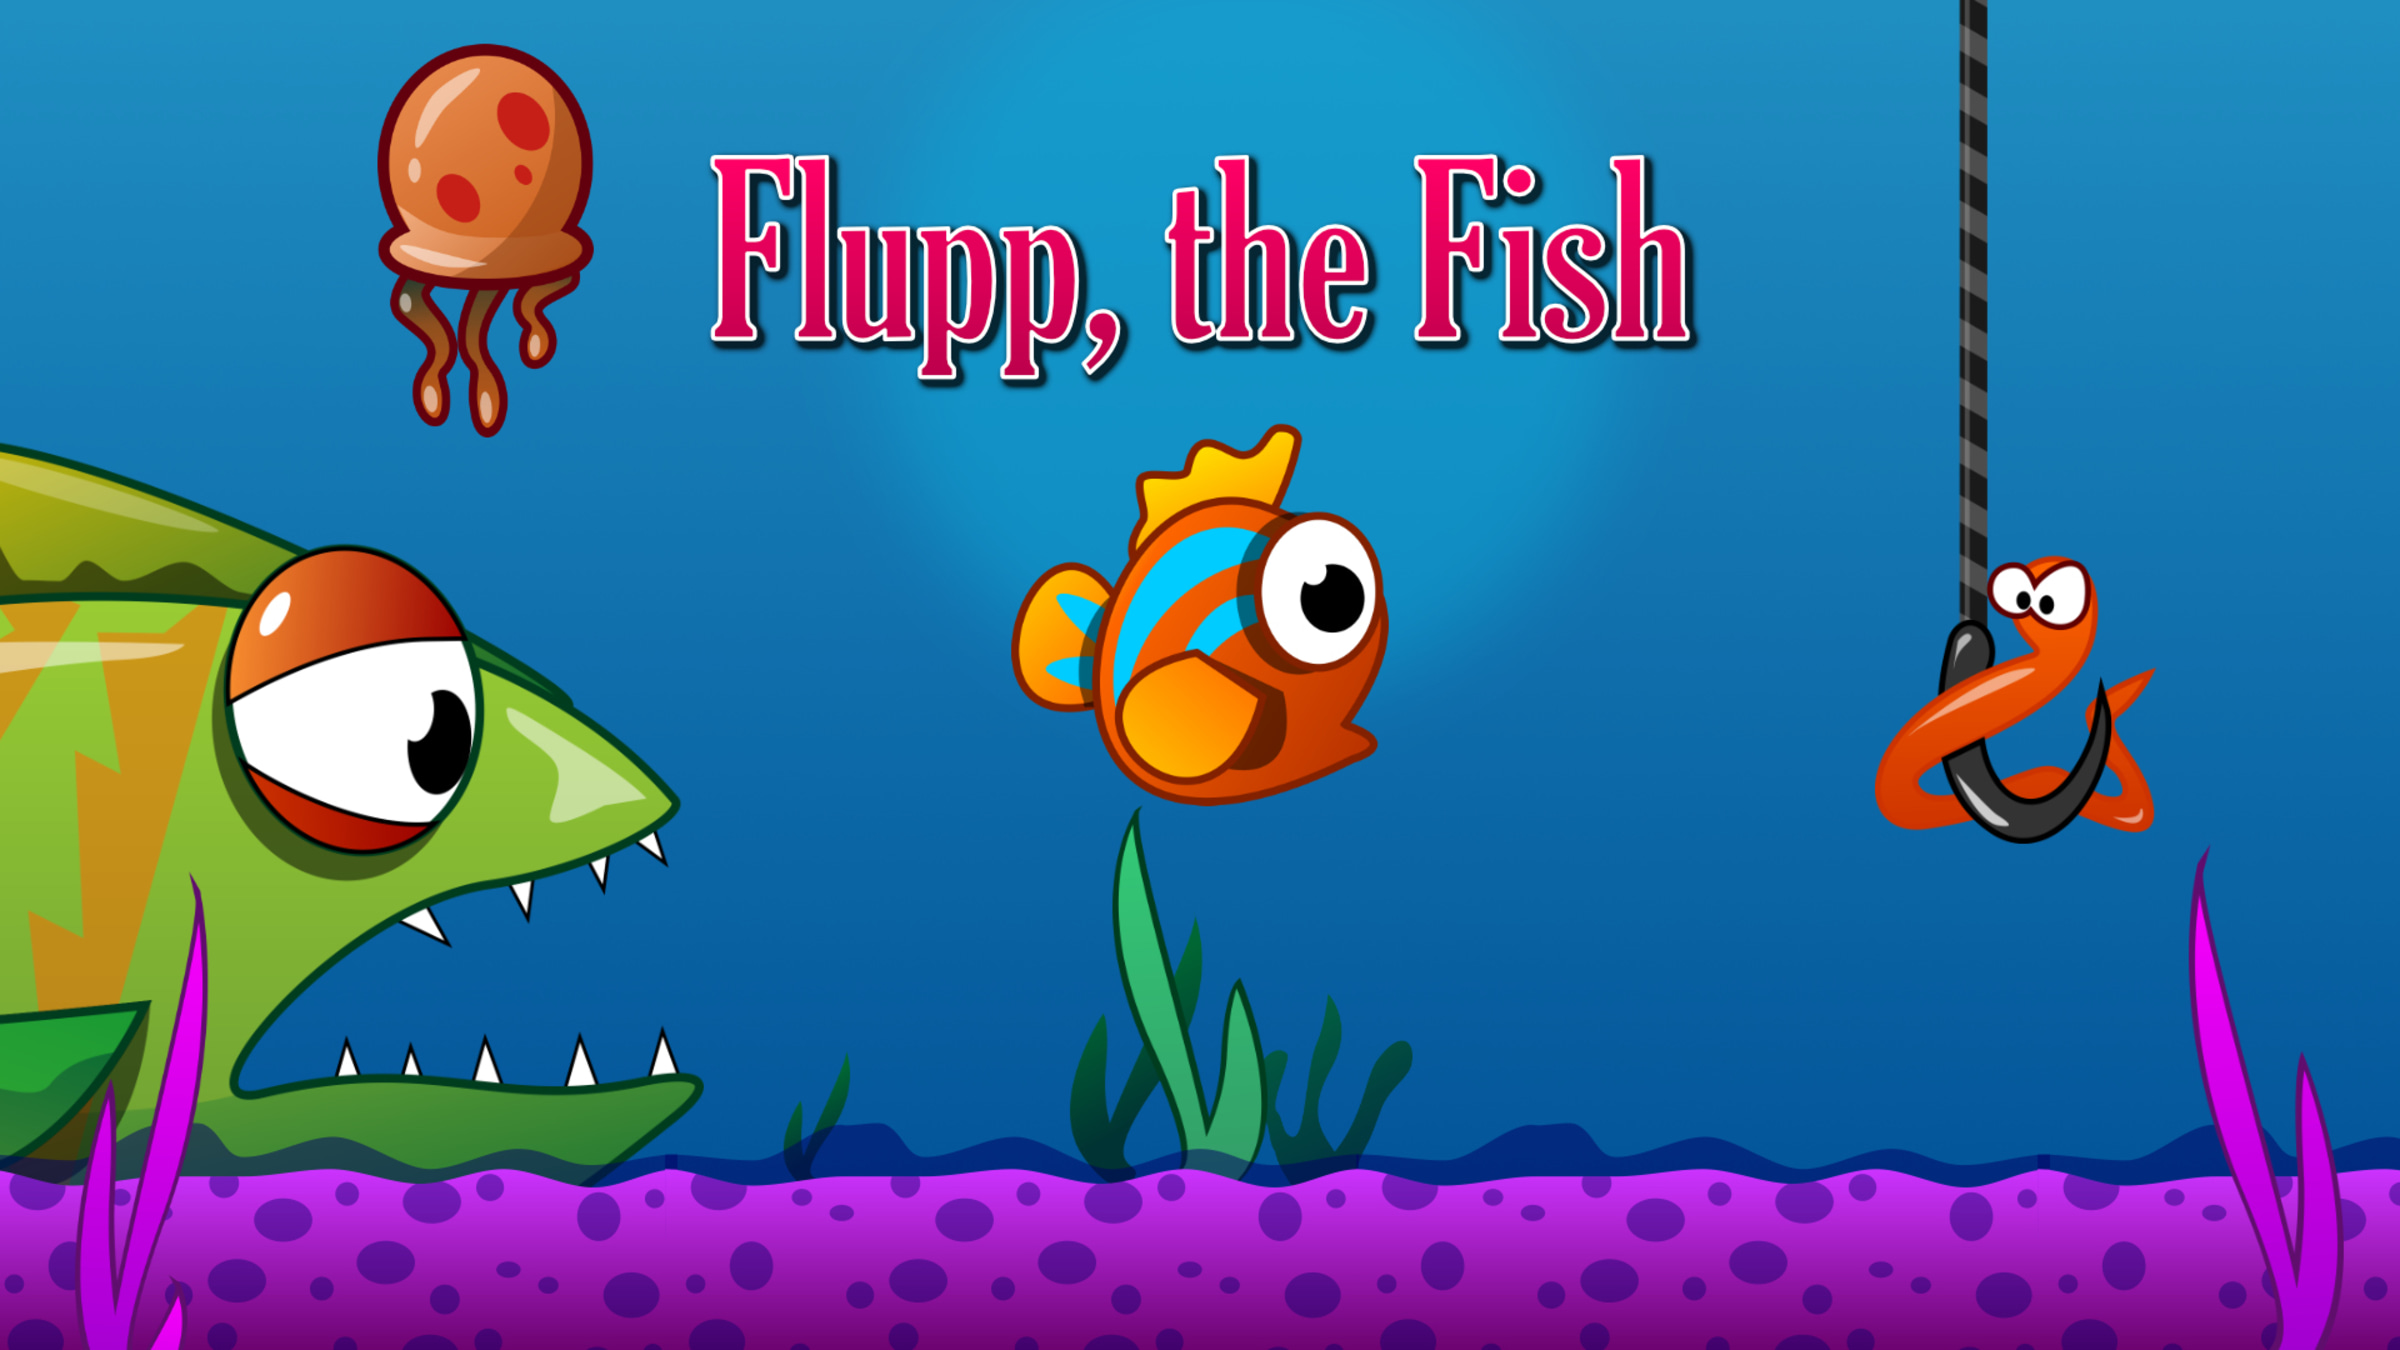 Flupp The Fish for Nintendo Switch - Nintendo Official Site